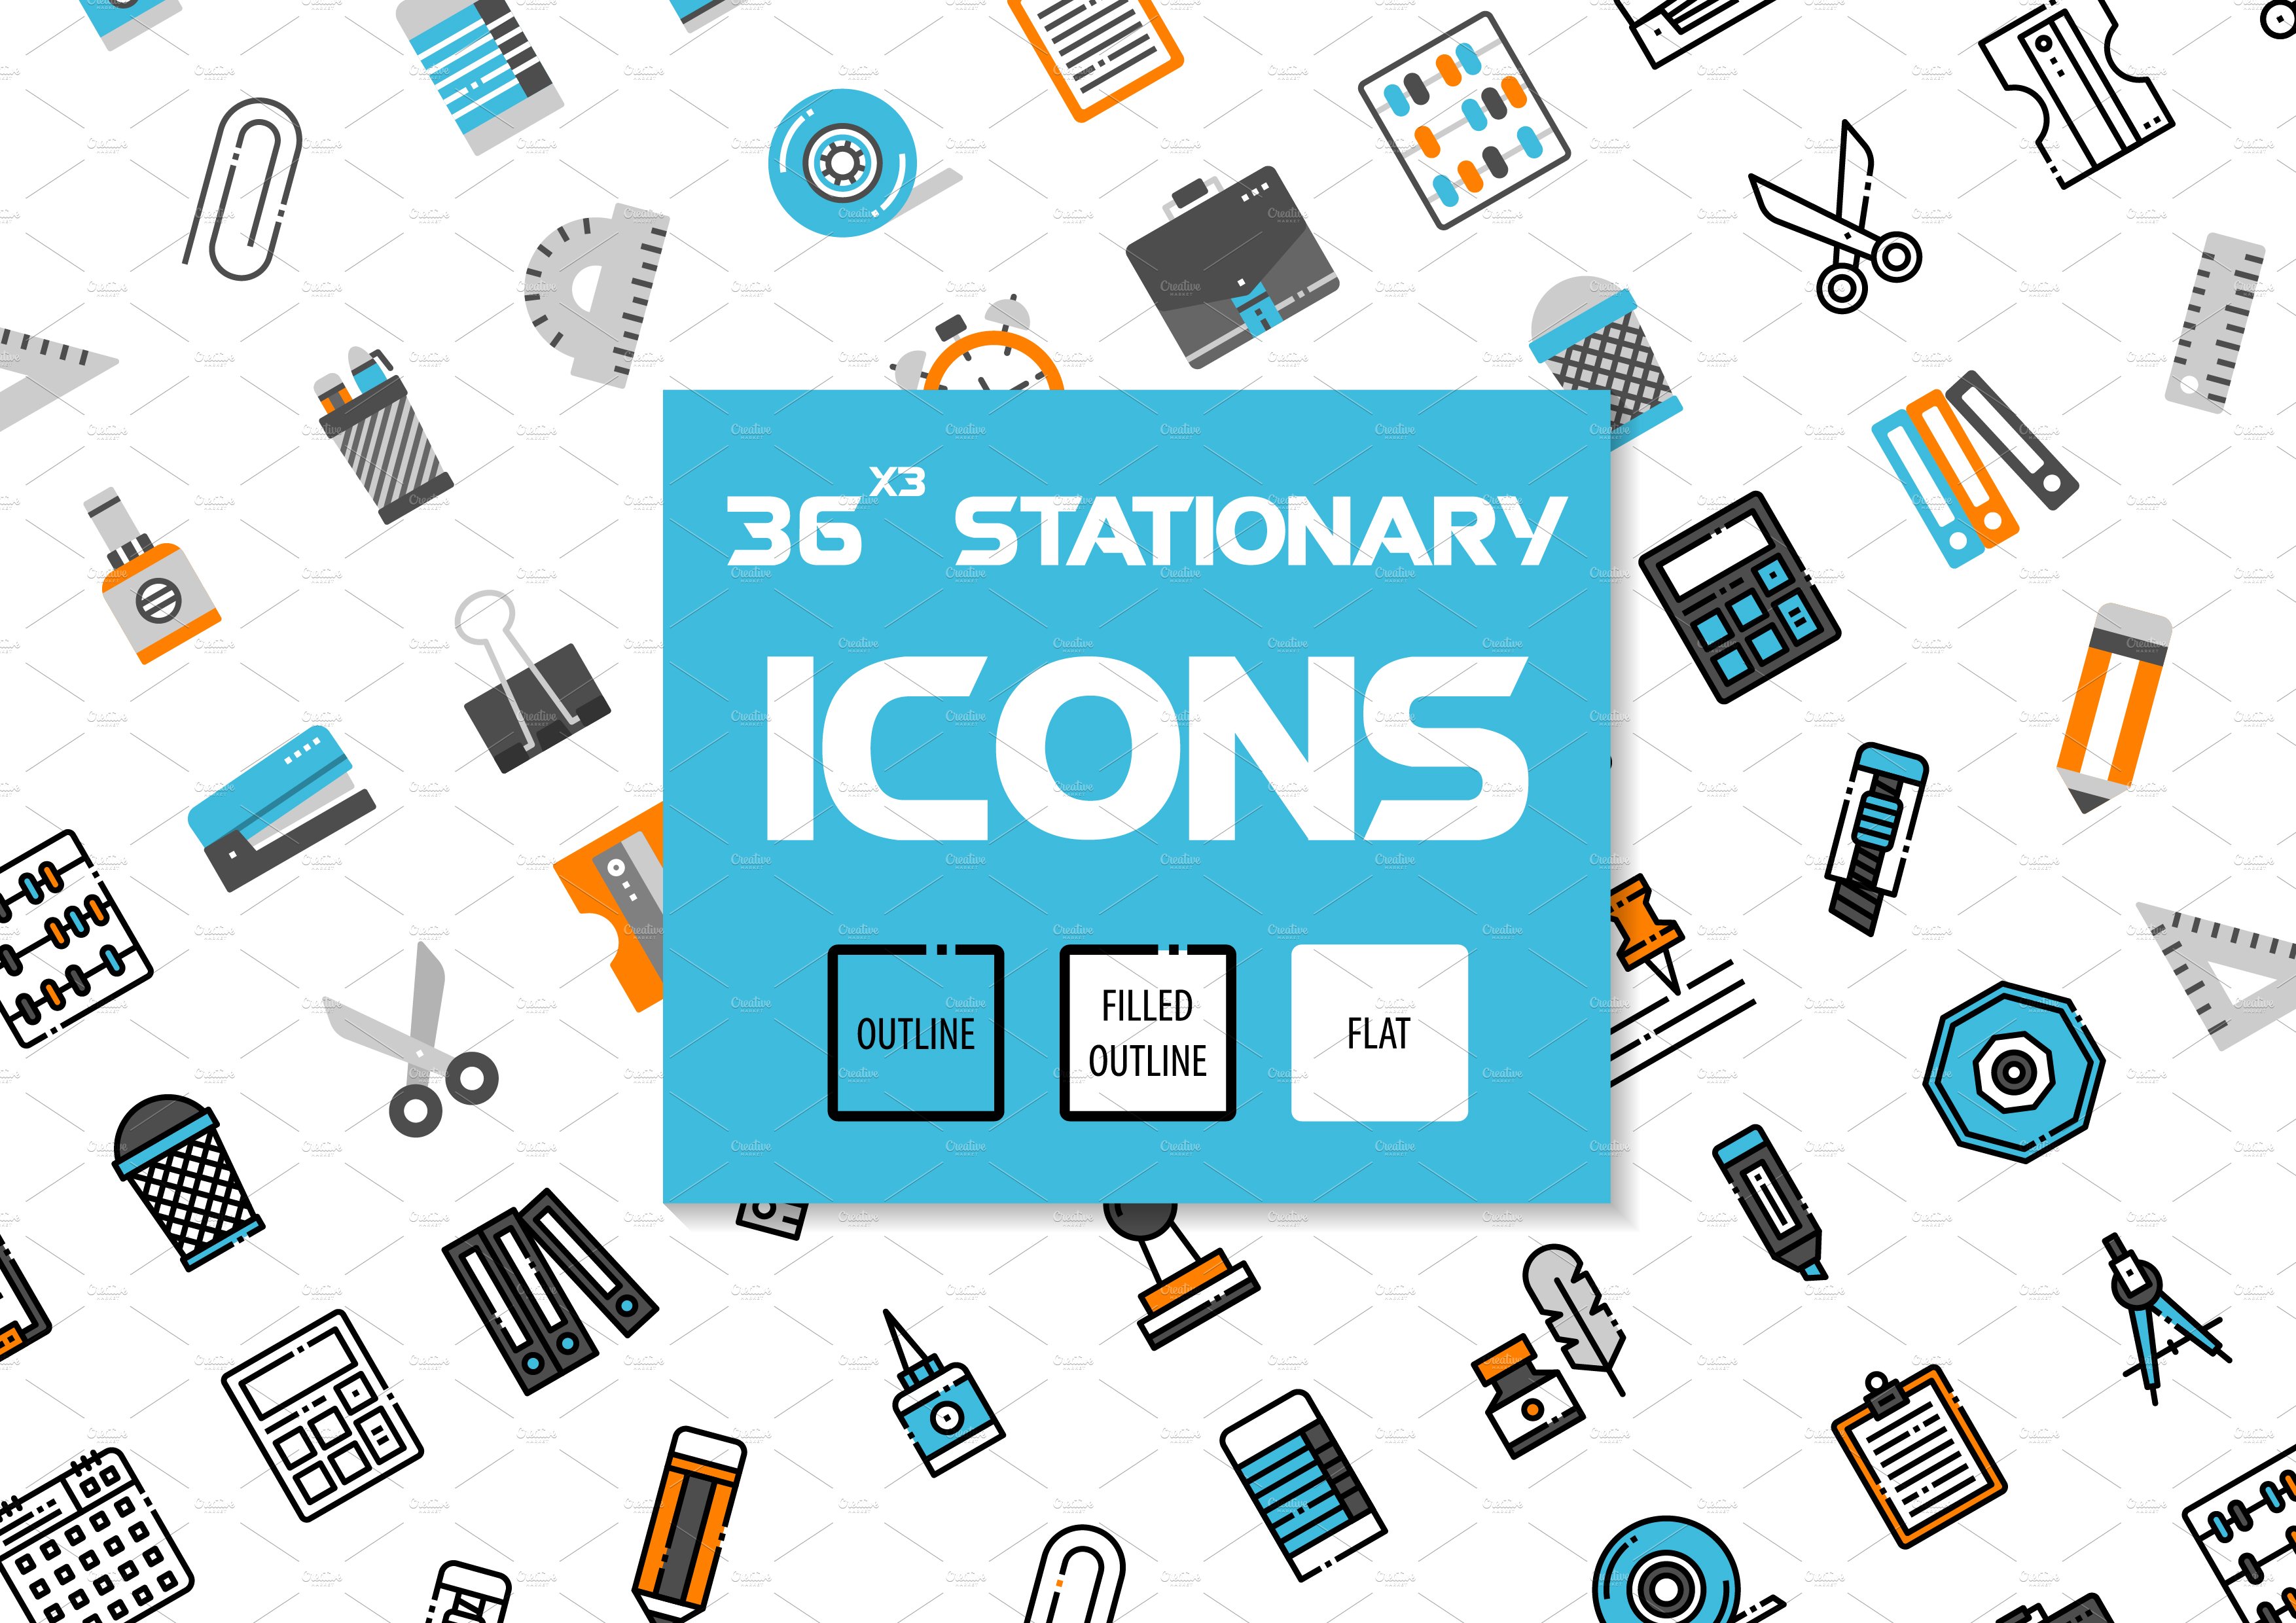 36x3 Stationary icons cover image.